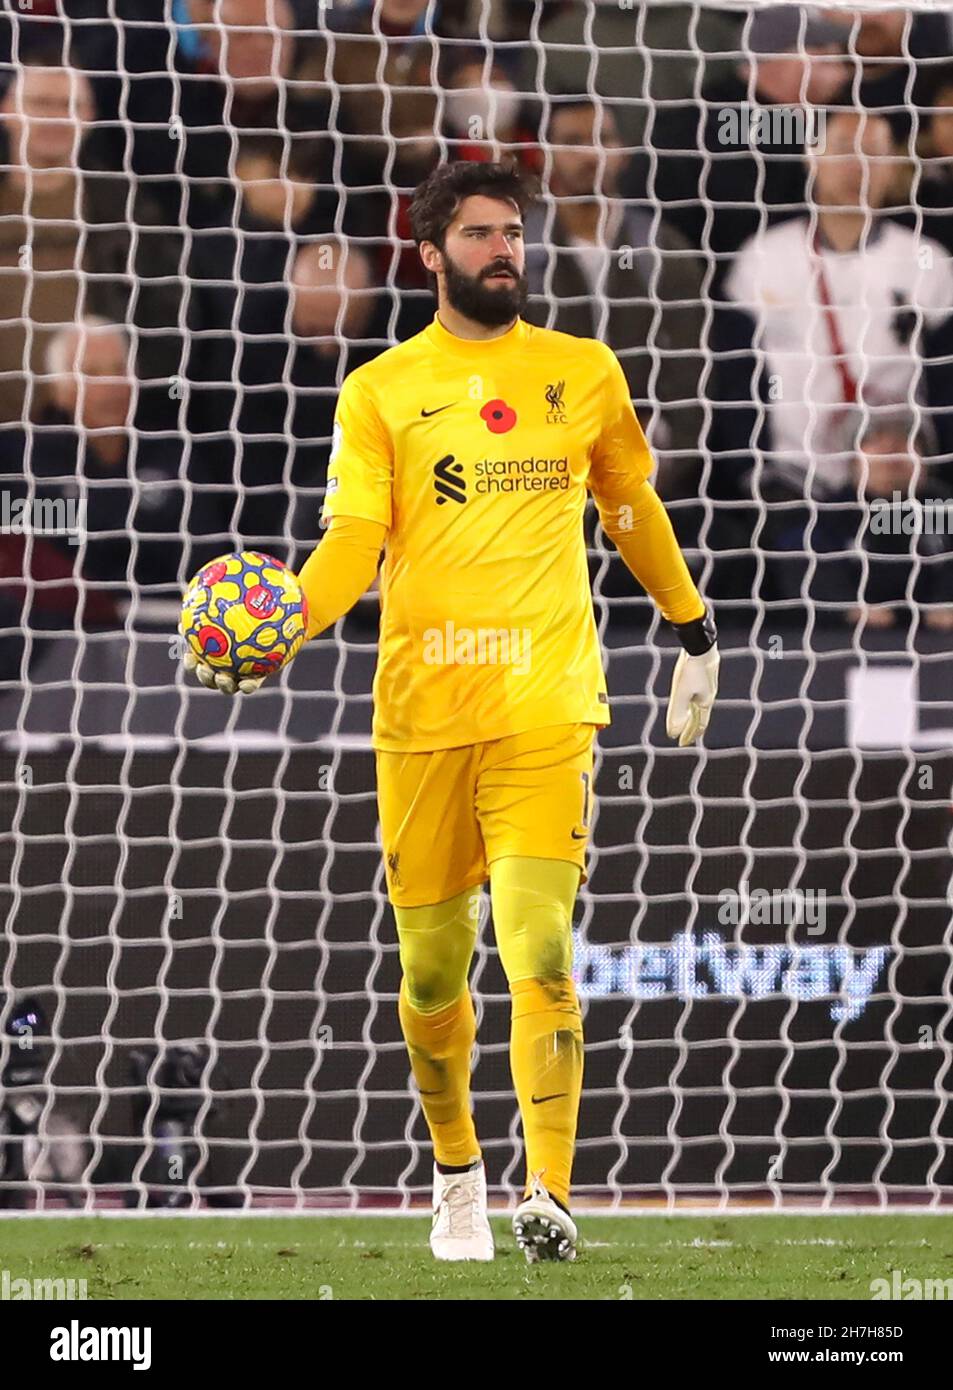 alisson-becker-of-liverpool-west-ham-united-v-liverpool-premier-league-london-stadium-london-uk-7th-november-2021-editorial-use-only-dataco-restrictions-apply-2H7H85D.jpg